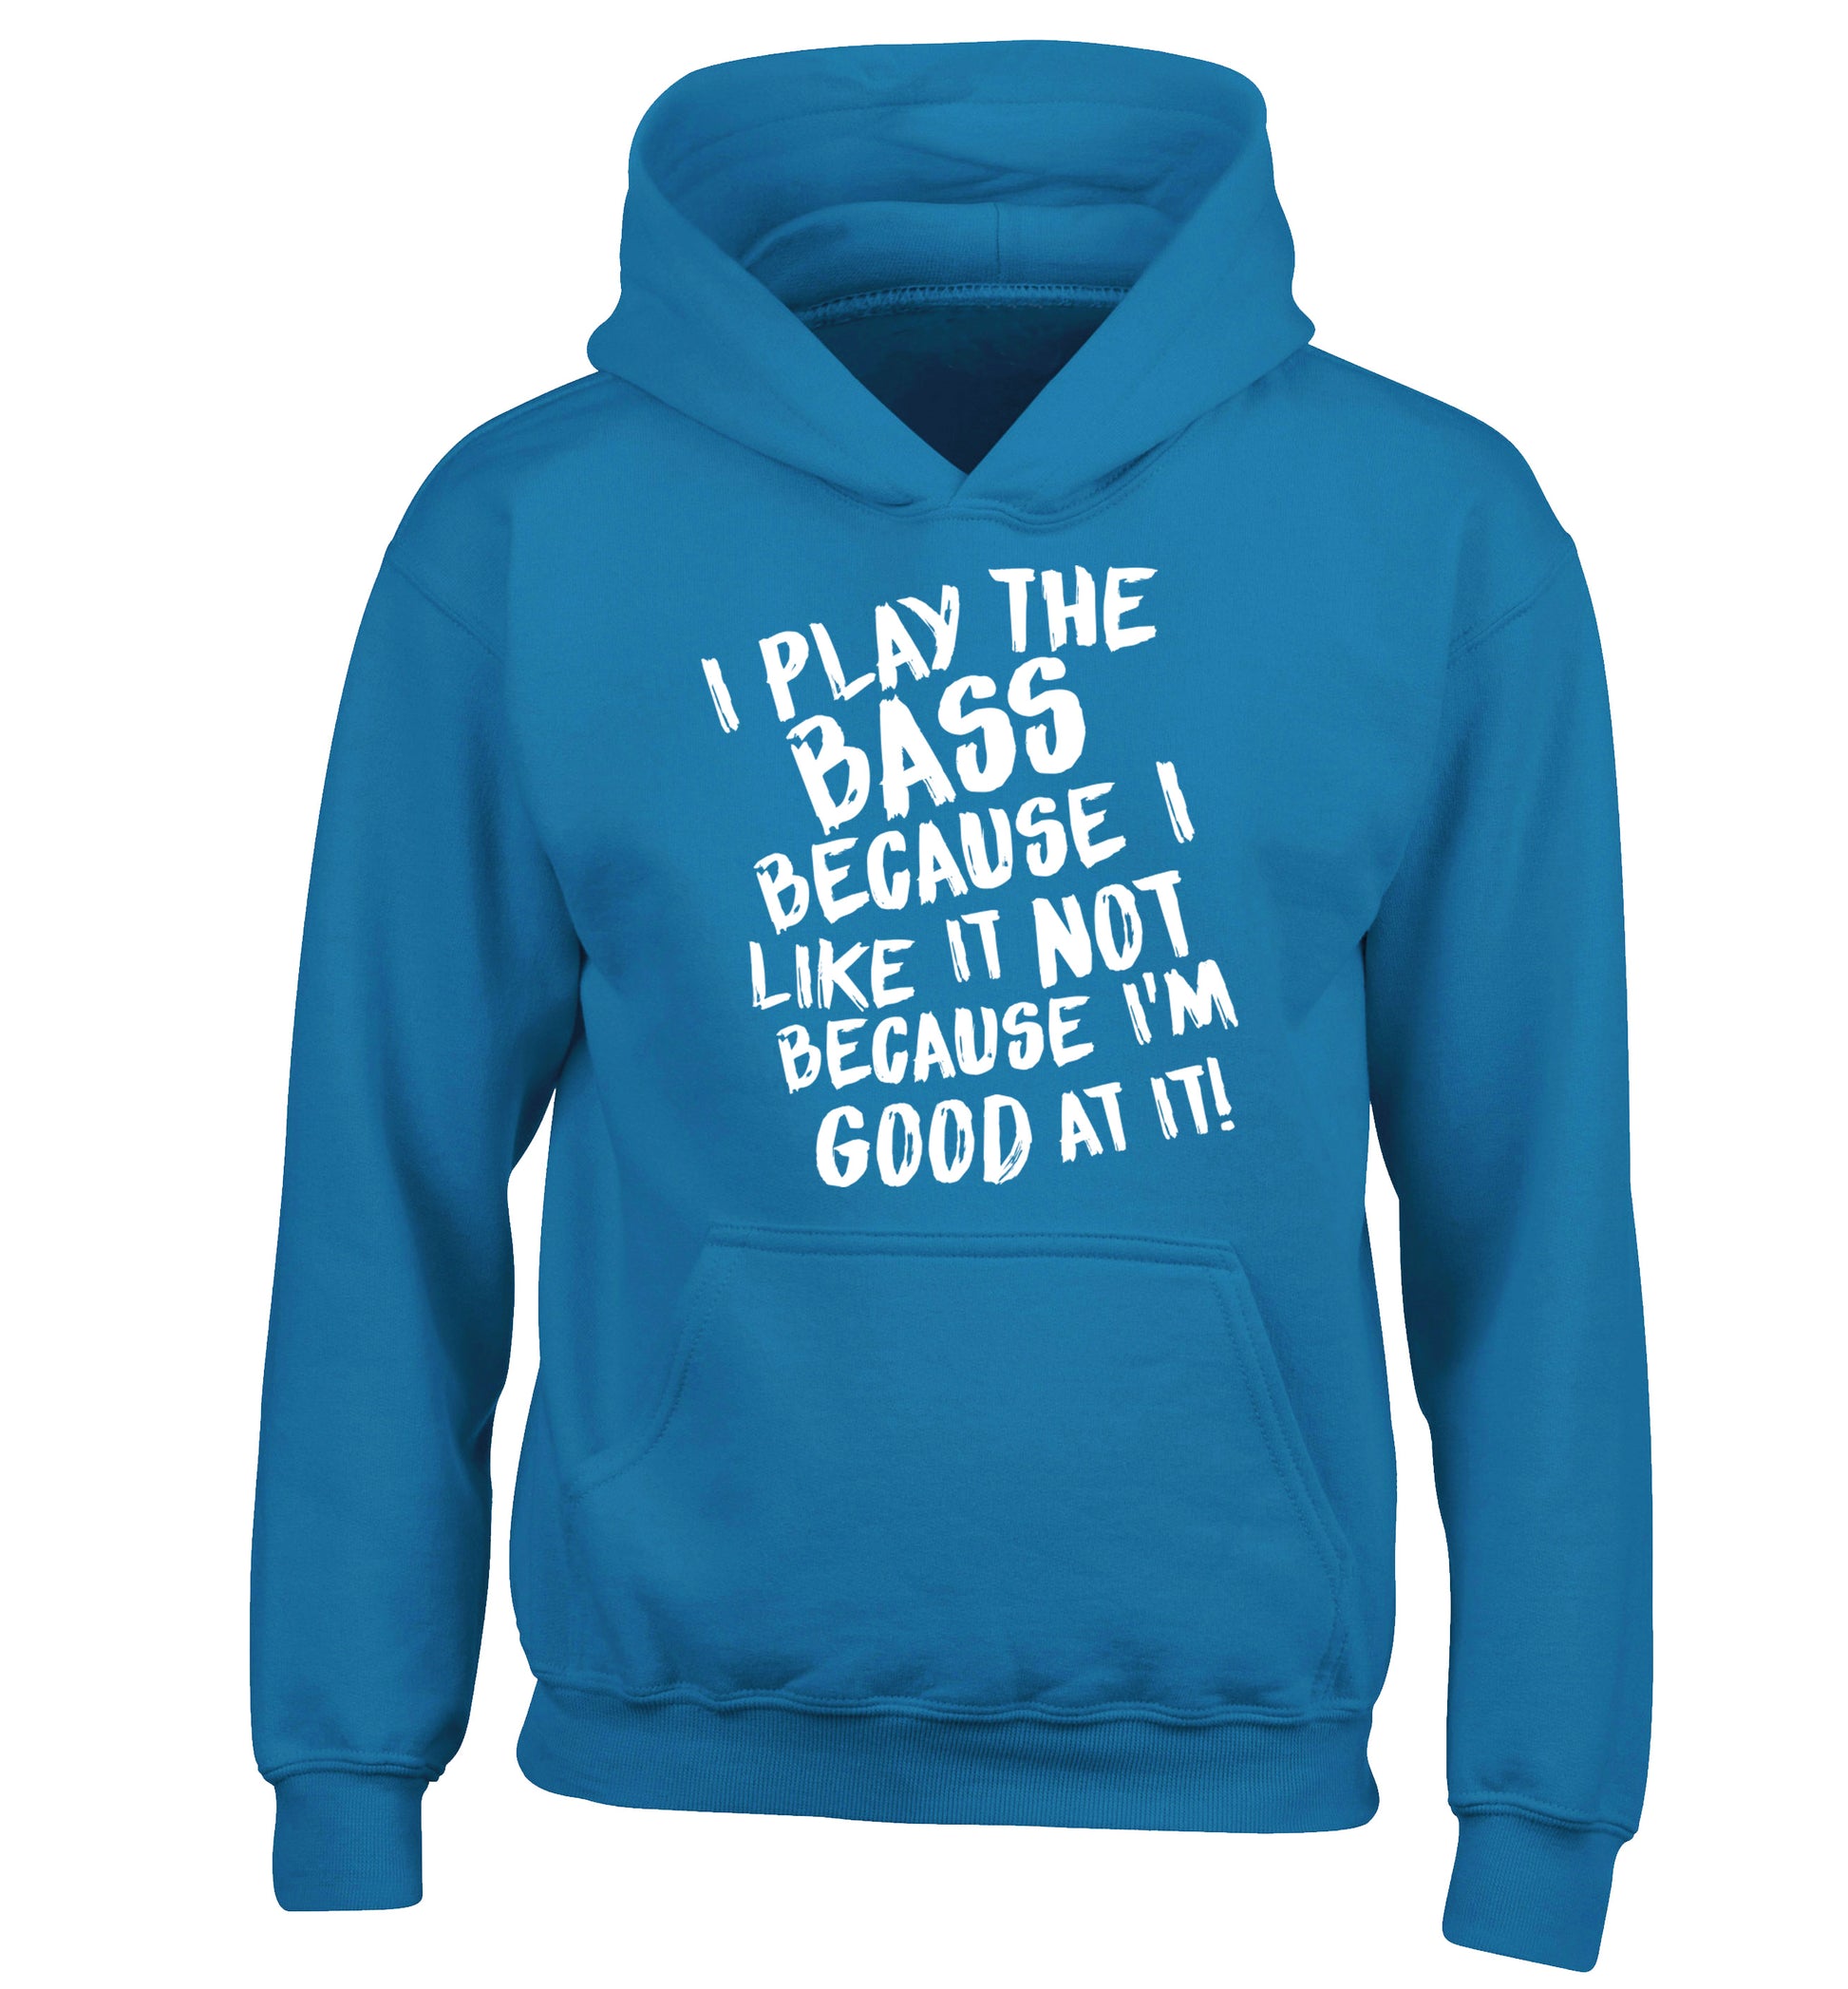 I play the bass because I like it not because I'm good at it children's blue hoodie 12-14 Years